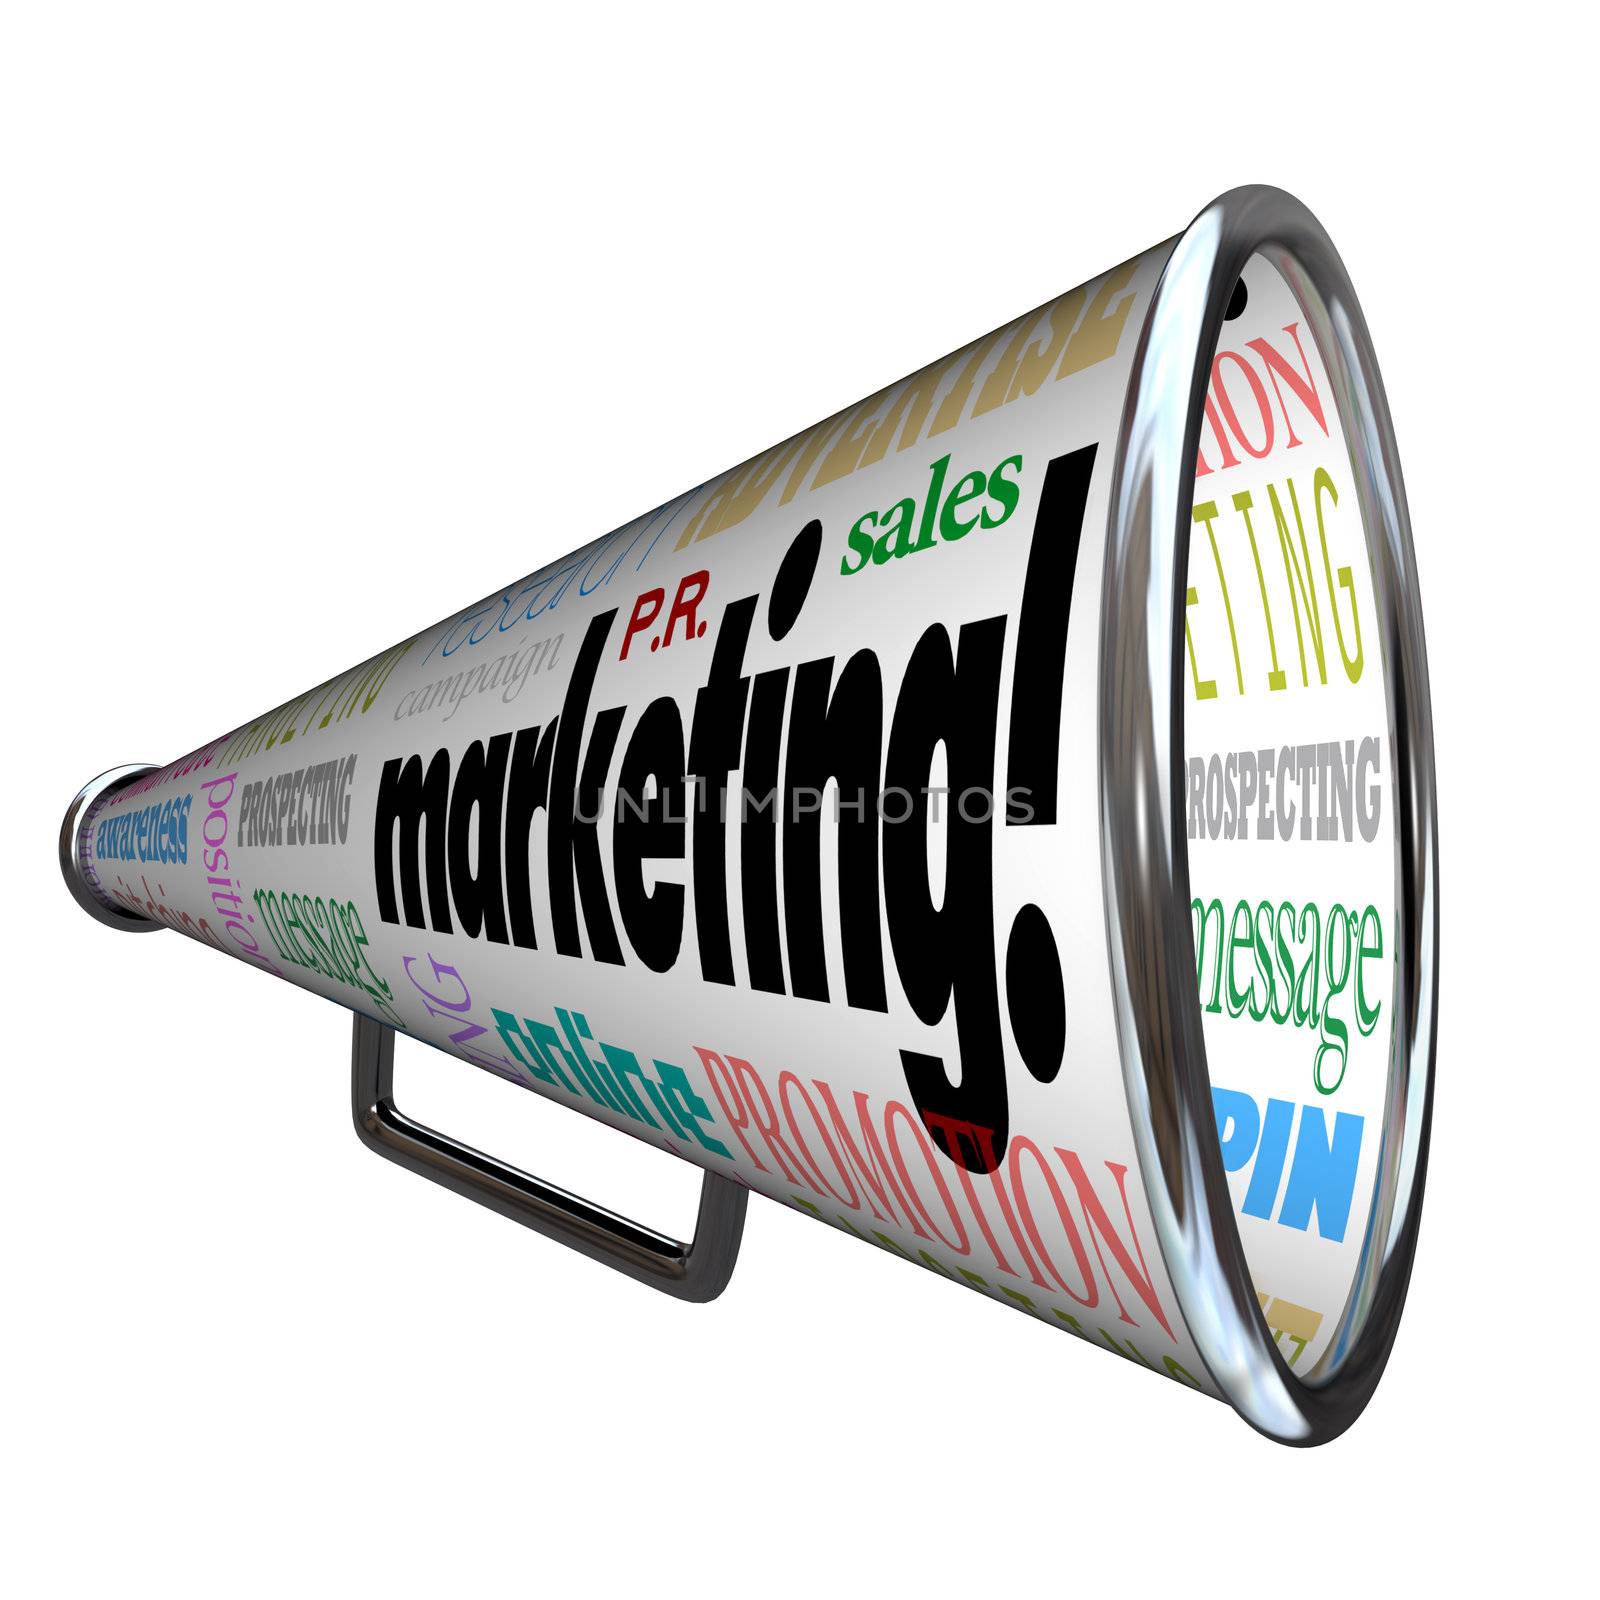 A megaphone or bullhorn with words on it for Marketing, advertising, positioning, awareness, message, public relations, sales, online, prospecting, targeting and more